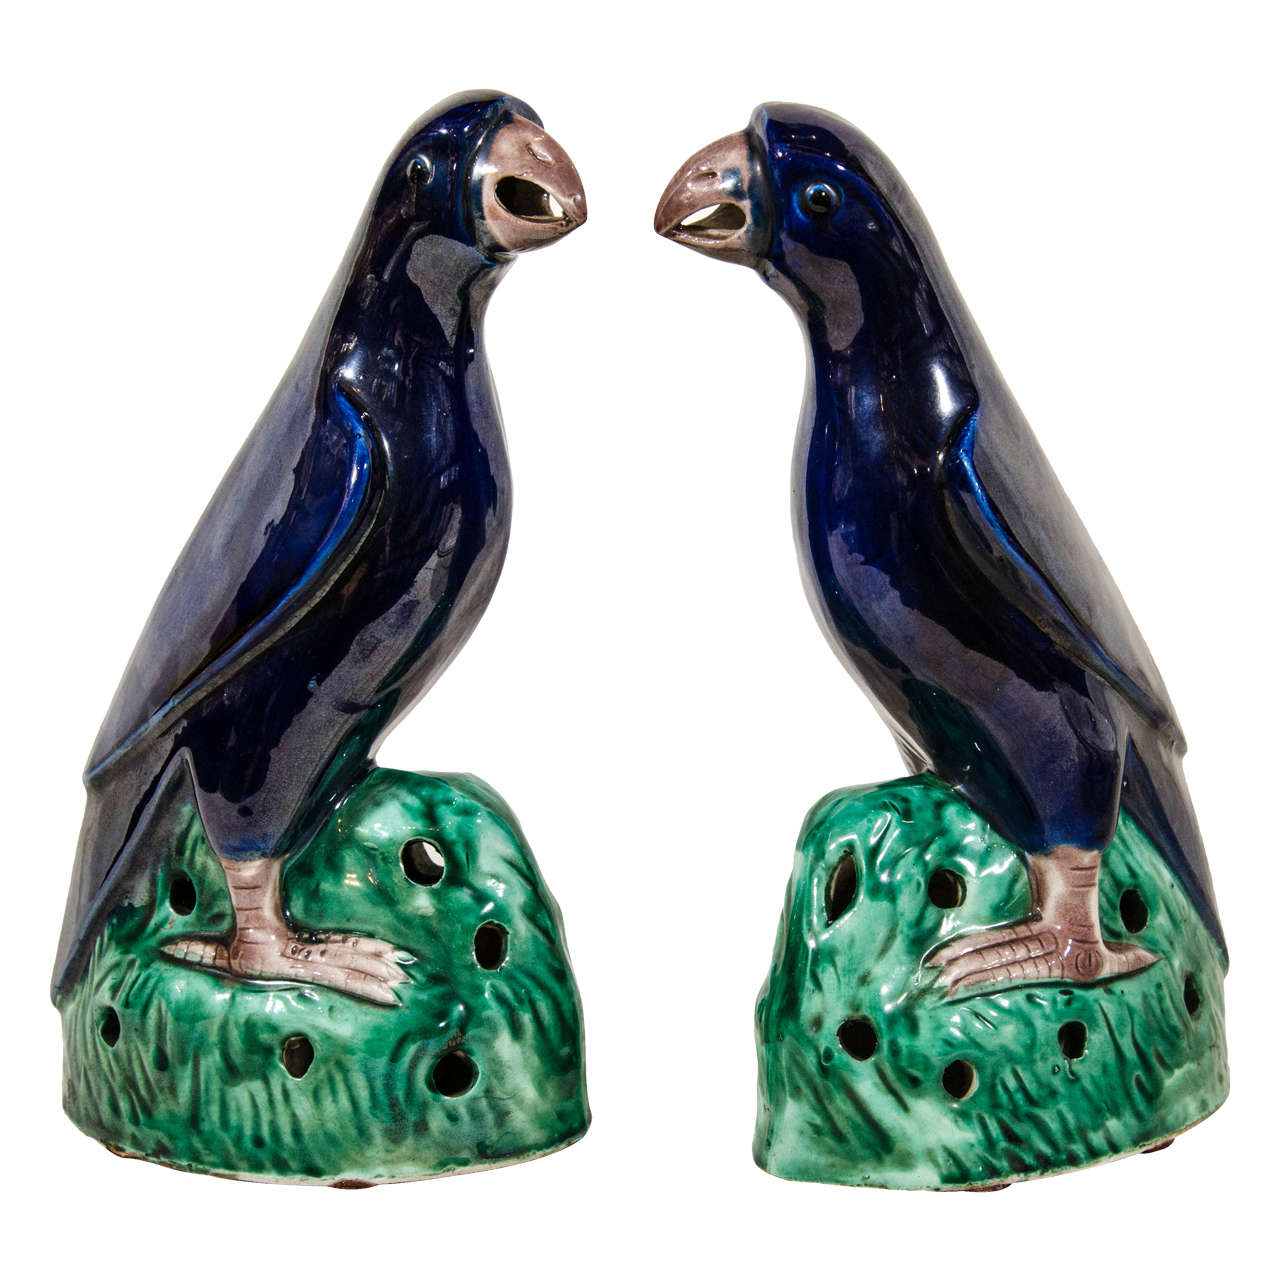 Pair of 19th Century Chinese Parrots with Cobalt Blue Glaze